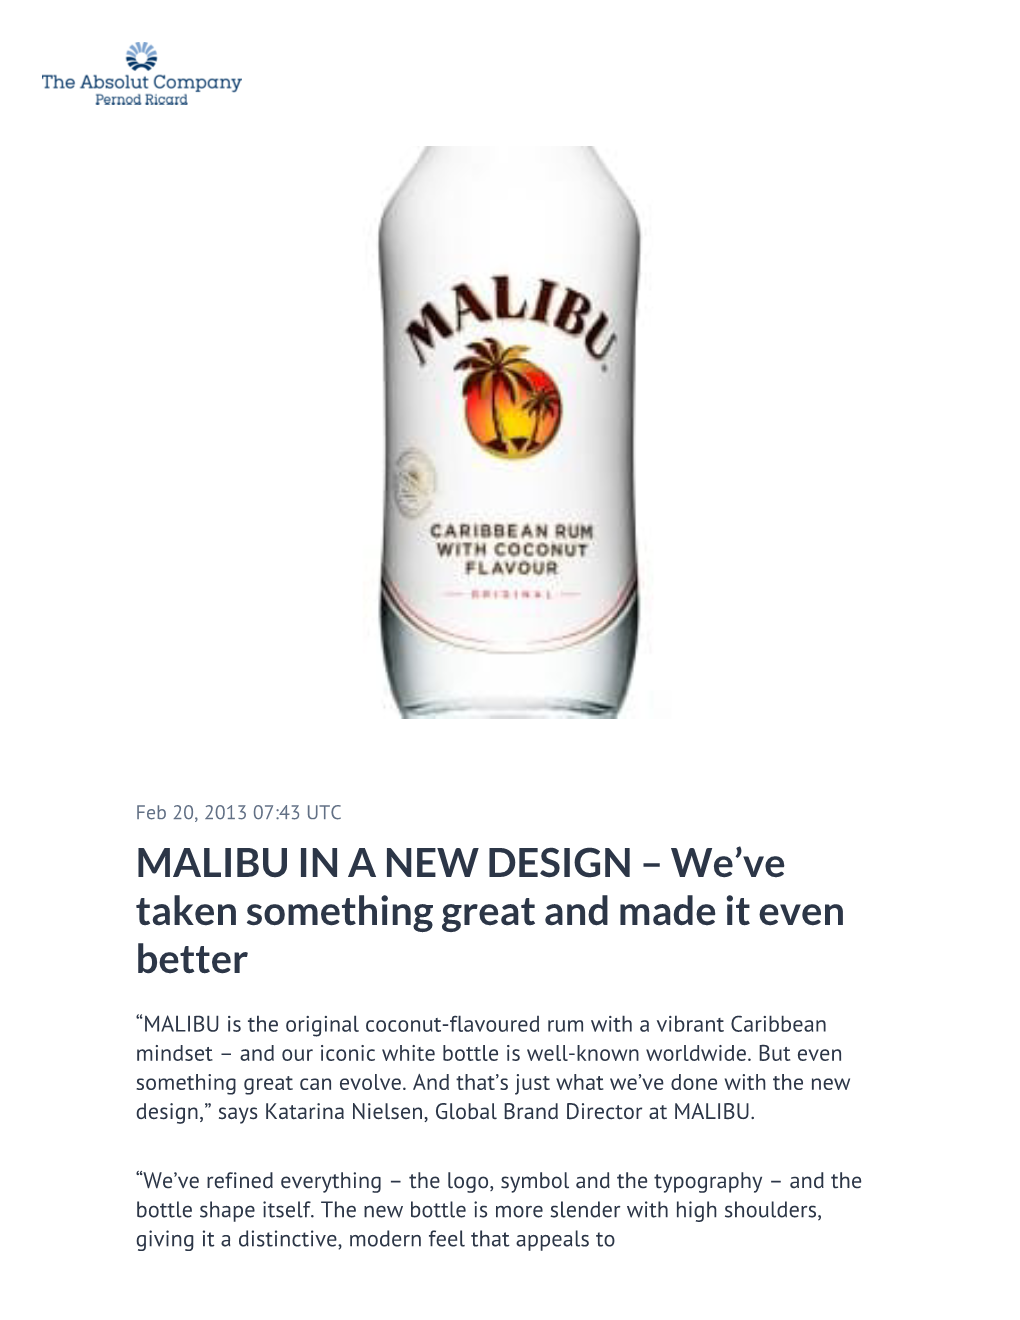 MALIBU in a NEW DESIGN – We’Ve Taken Something Great and Made It Even Better